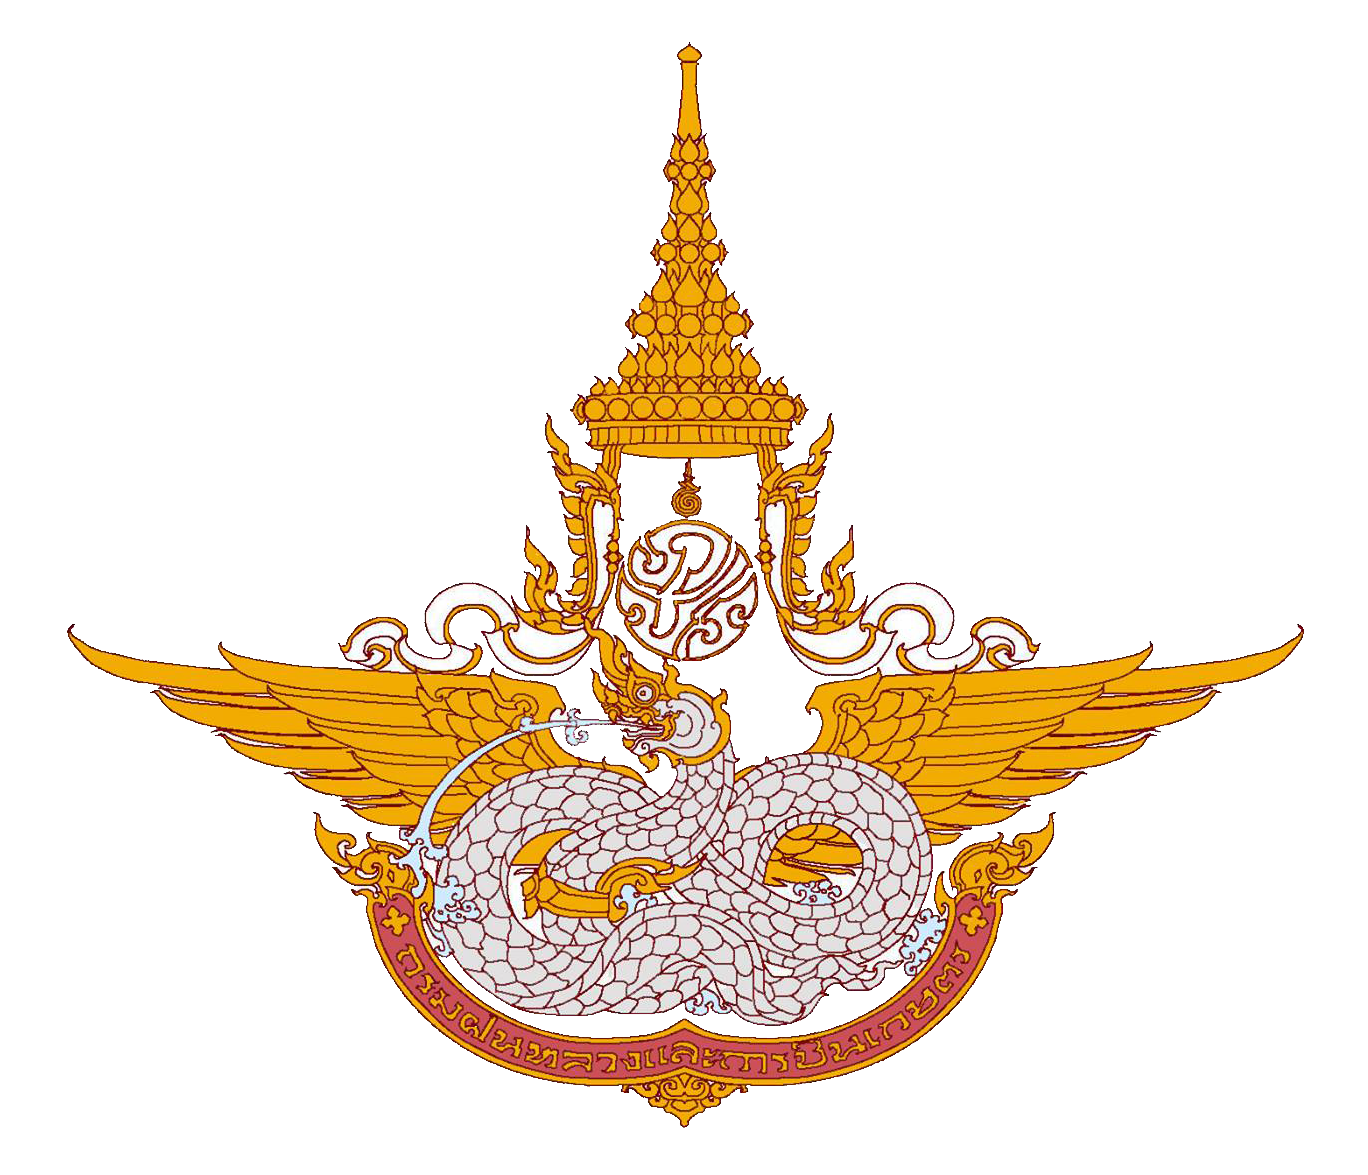 Emblem_of_Department_of_Royal_Rainmaking_and_Agricultural_Aviation